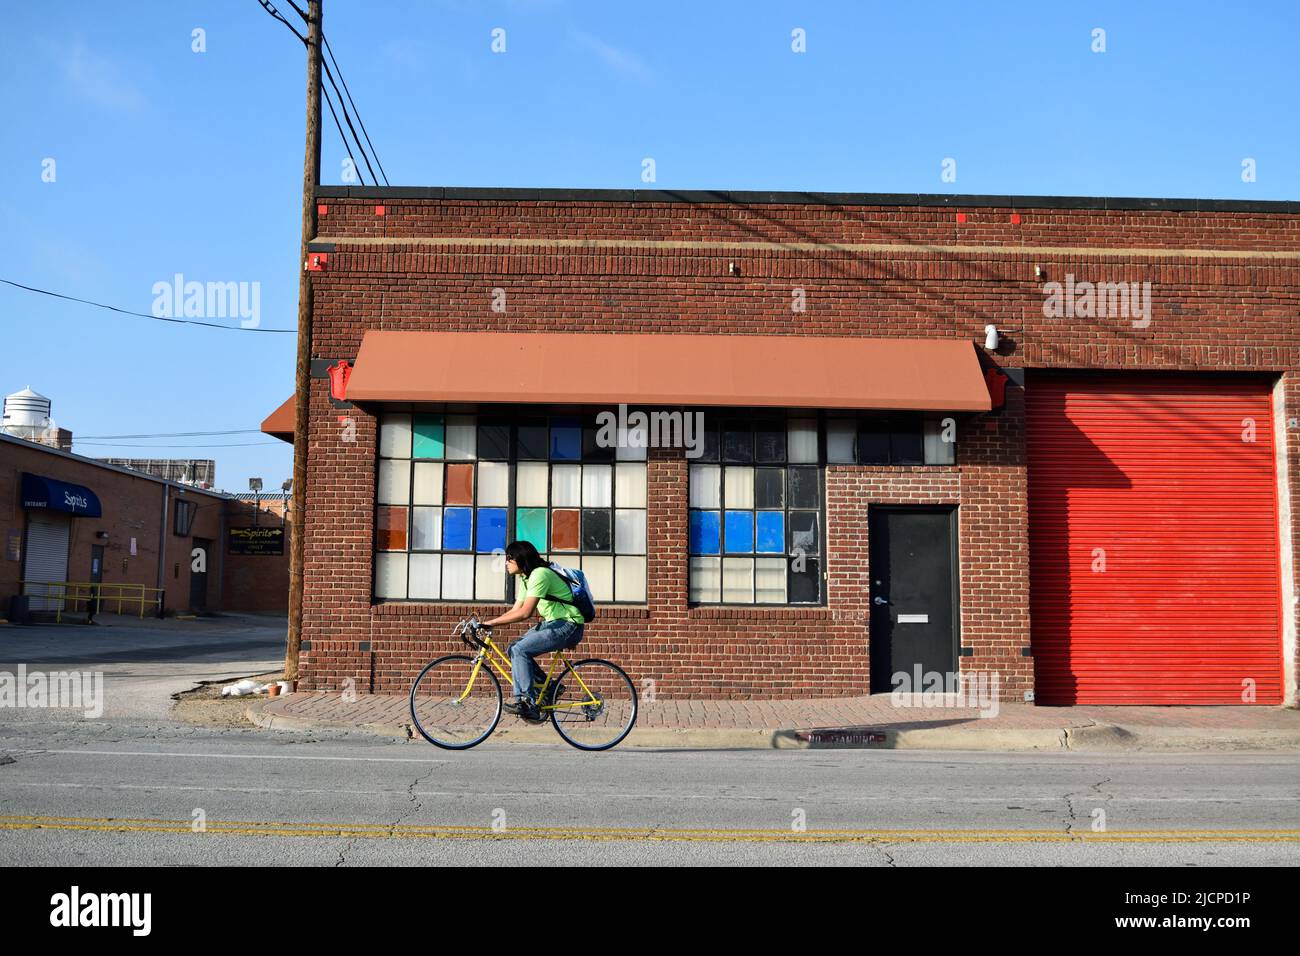 Bicyclist riding in front of a old brick building in Deep Ellum area of Dallas; colorful windows on the building ca. 2014 Stock Photo